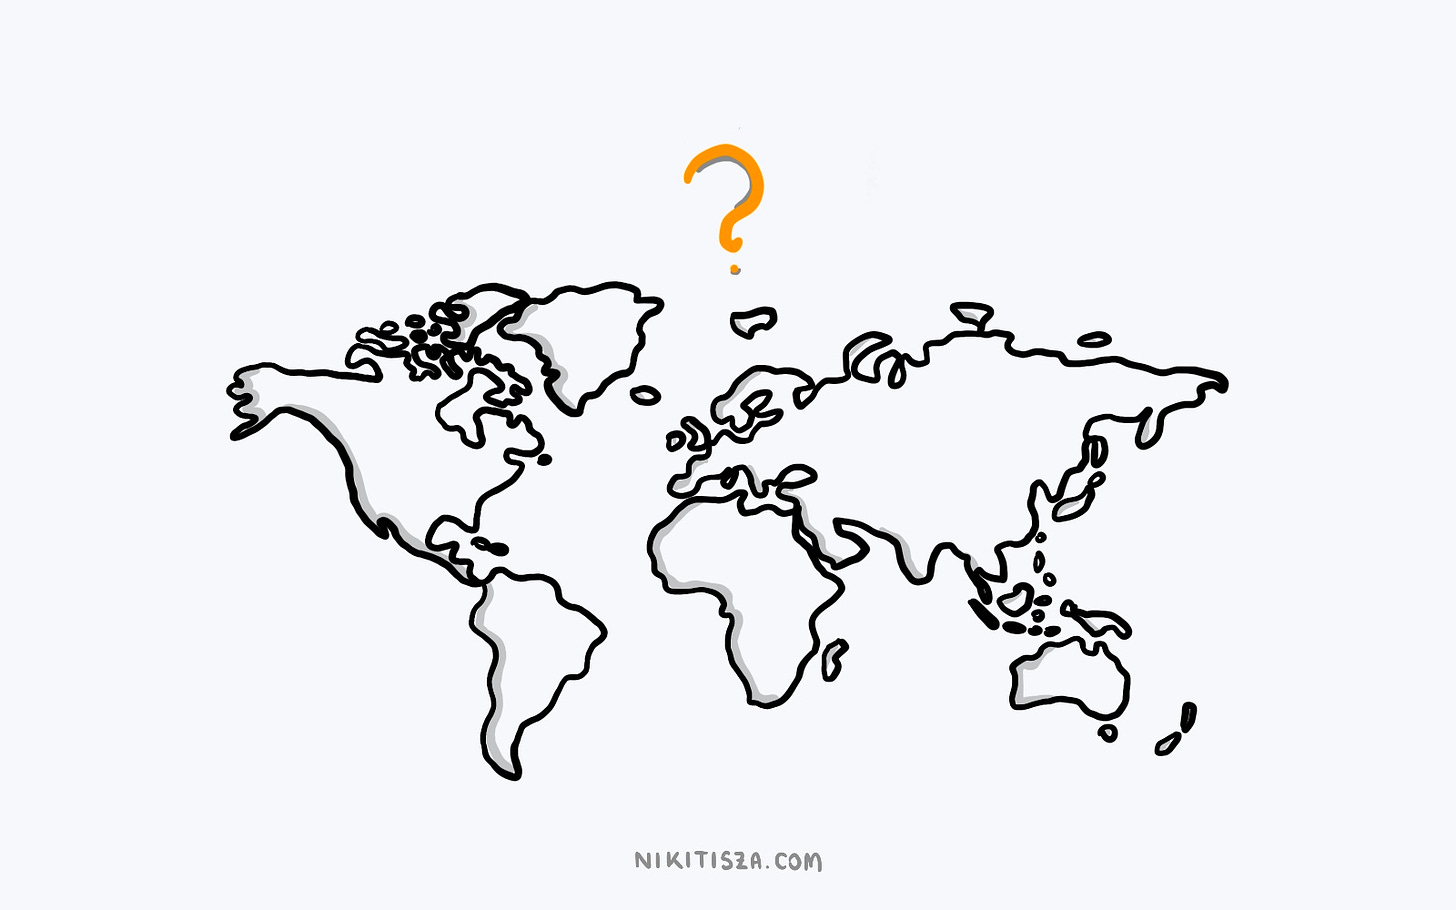 Where are you really from (world map) by the author